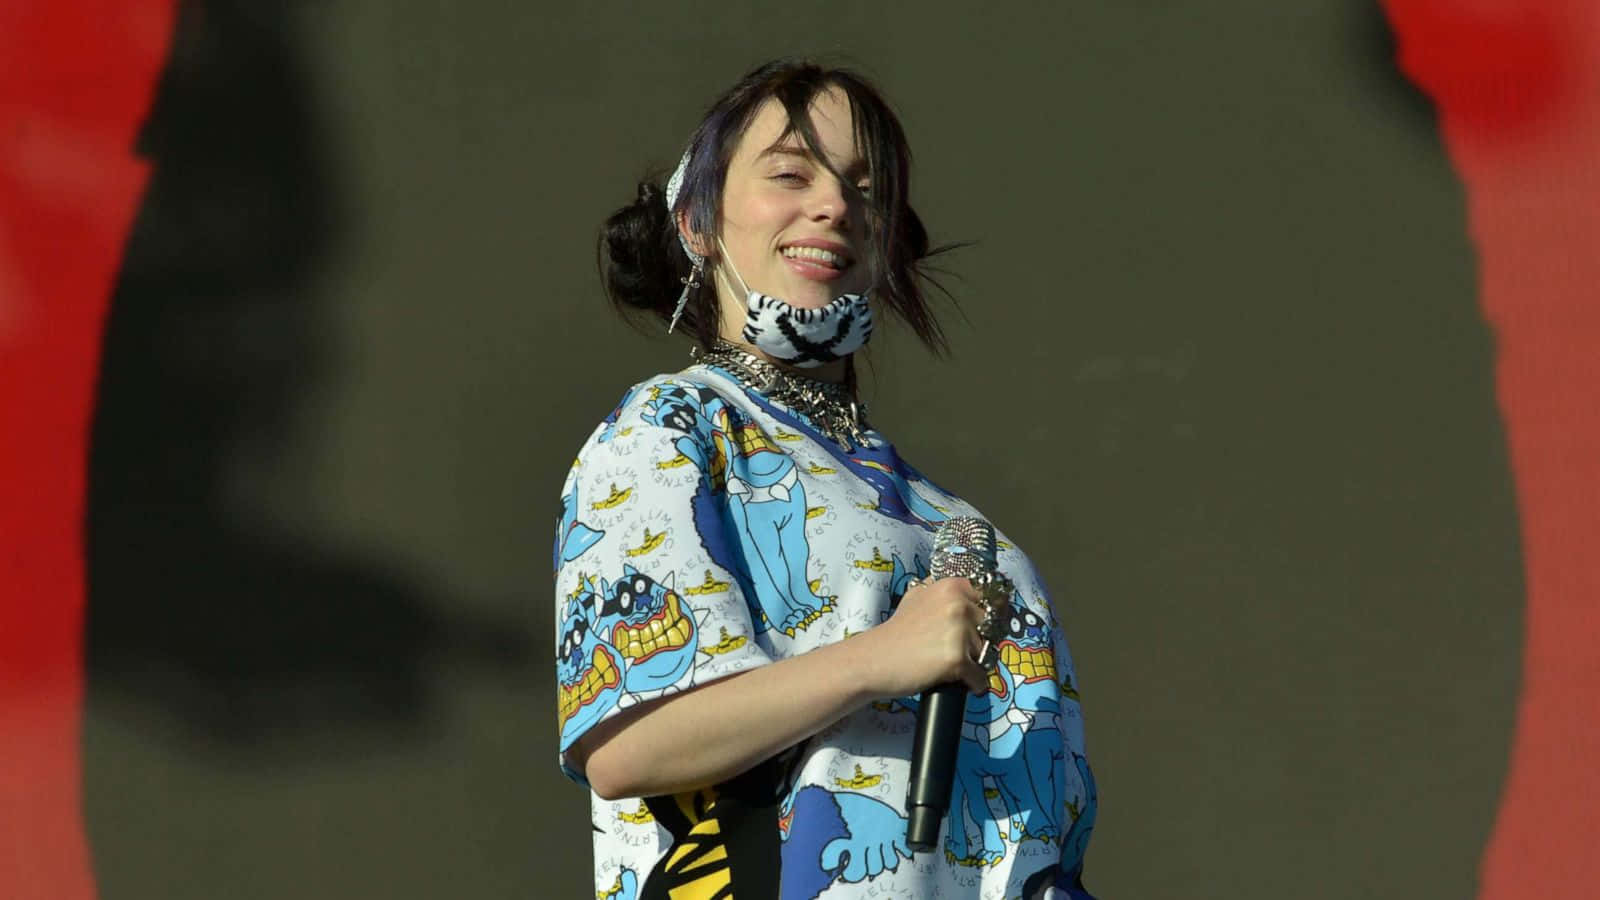 Billie Eilish confidently turns on her laptop, ready to create her unique style of music. Wallpaper